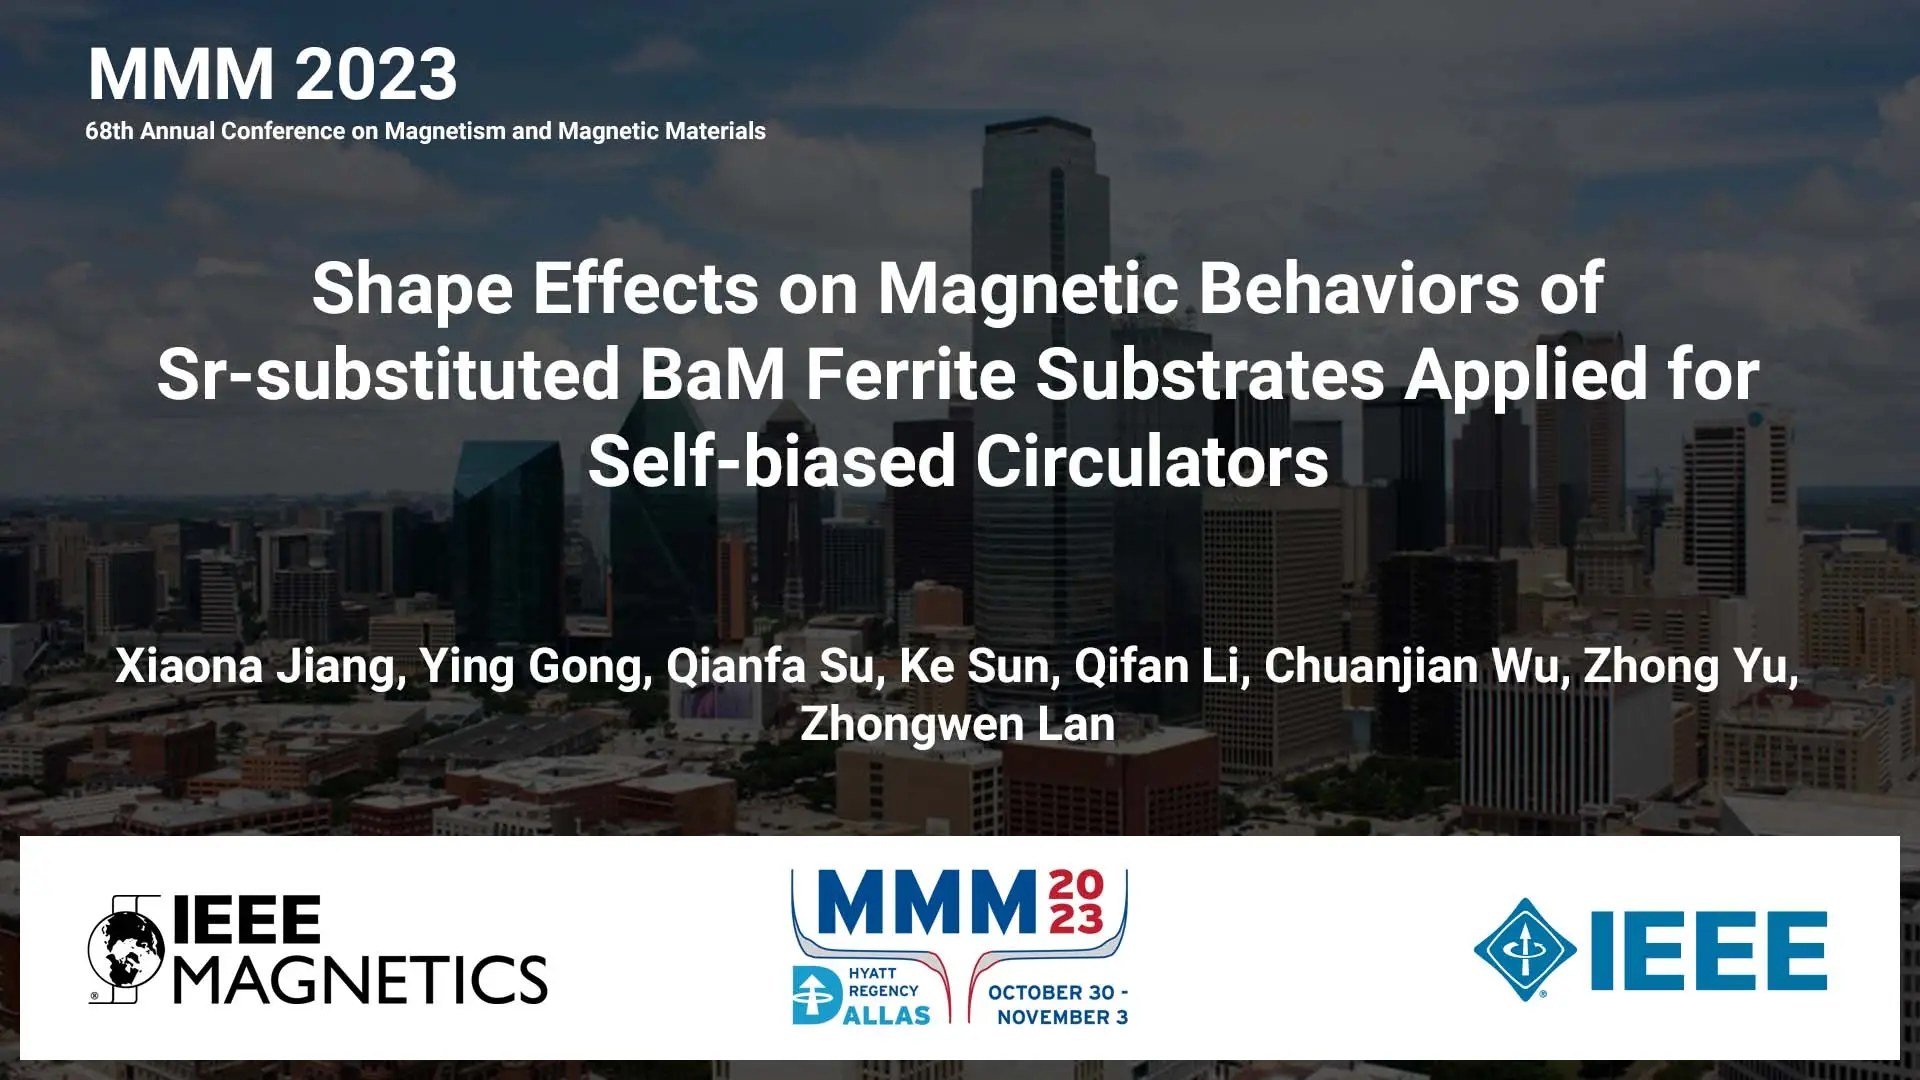 VP10-02: Shape Effects on Magnetic Behaviors of Sr-substituted BaM Ferrite Substrates Applied for Self-biased Circulators